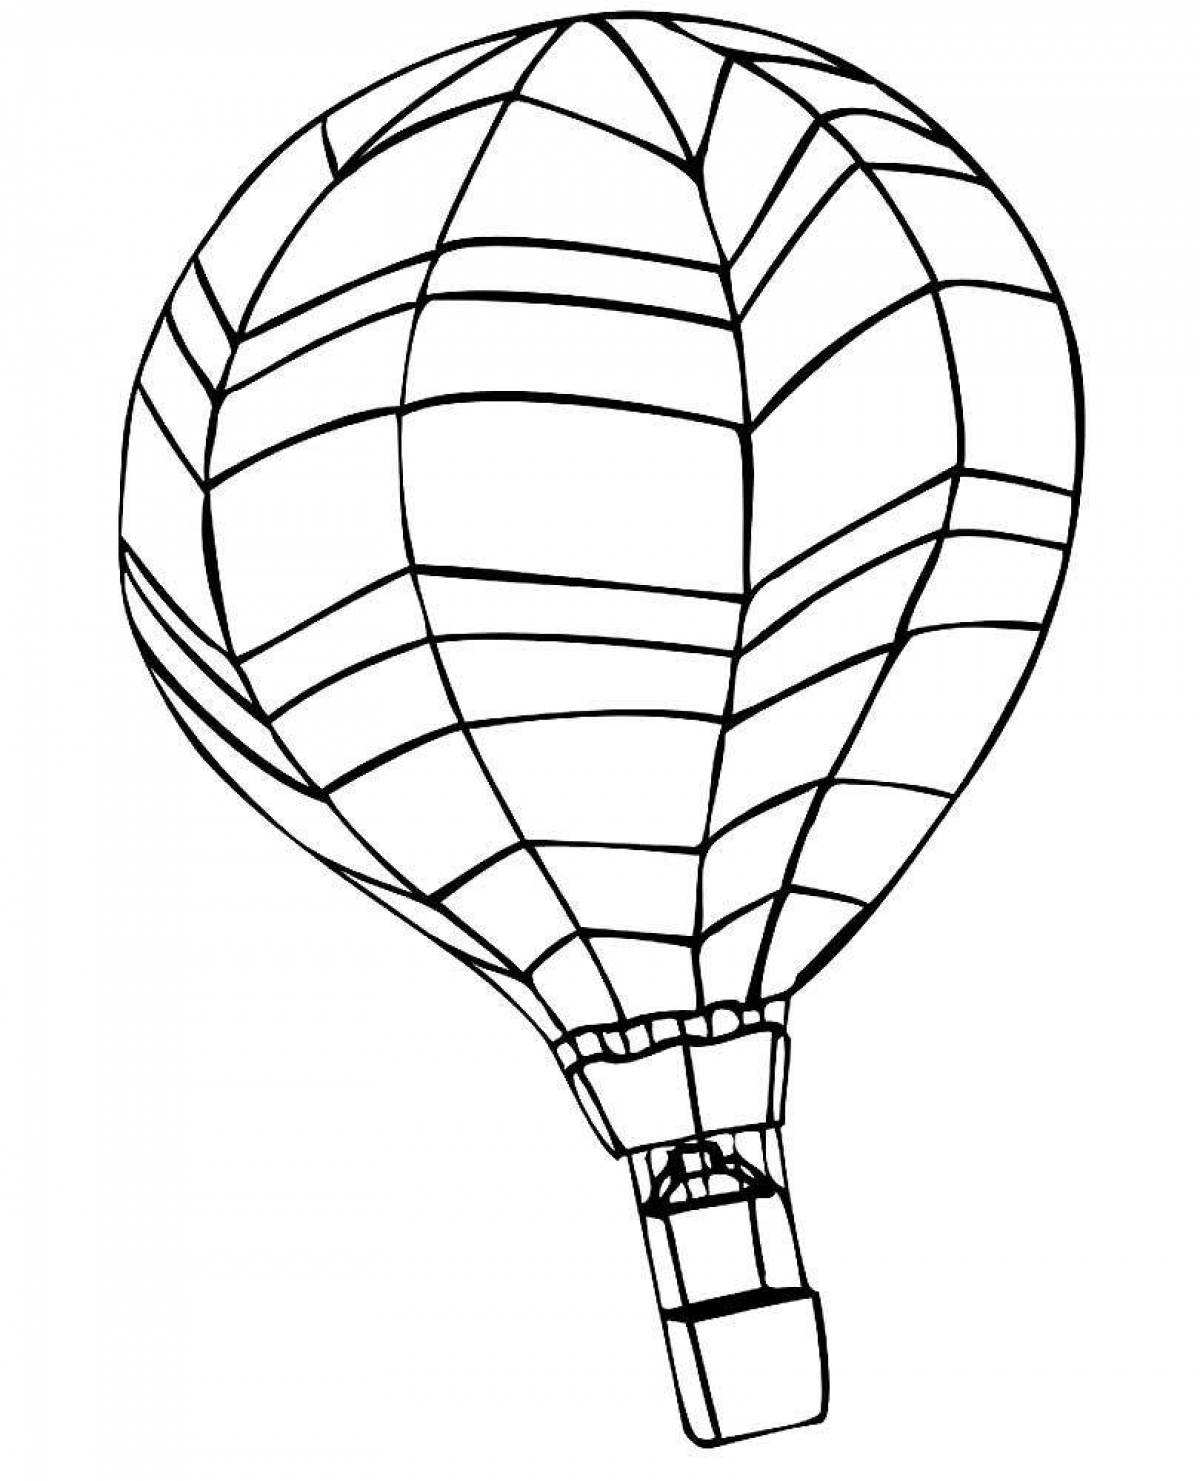 Coloring book exquisite balloon with a basket